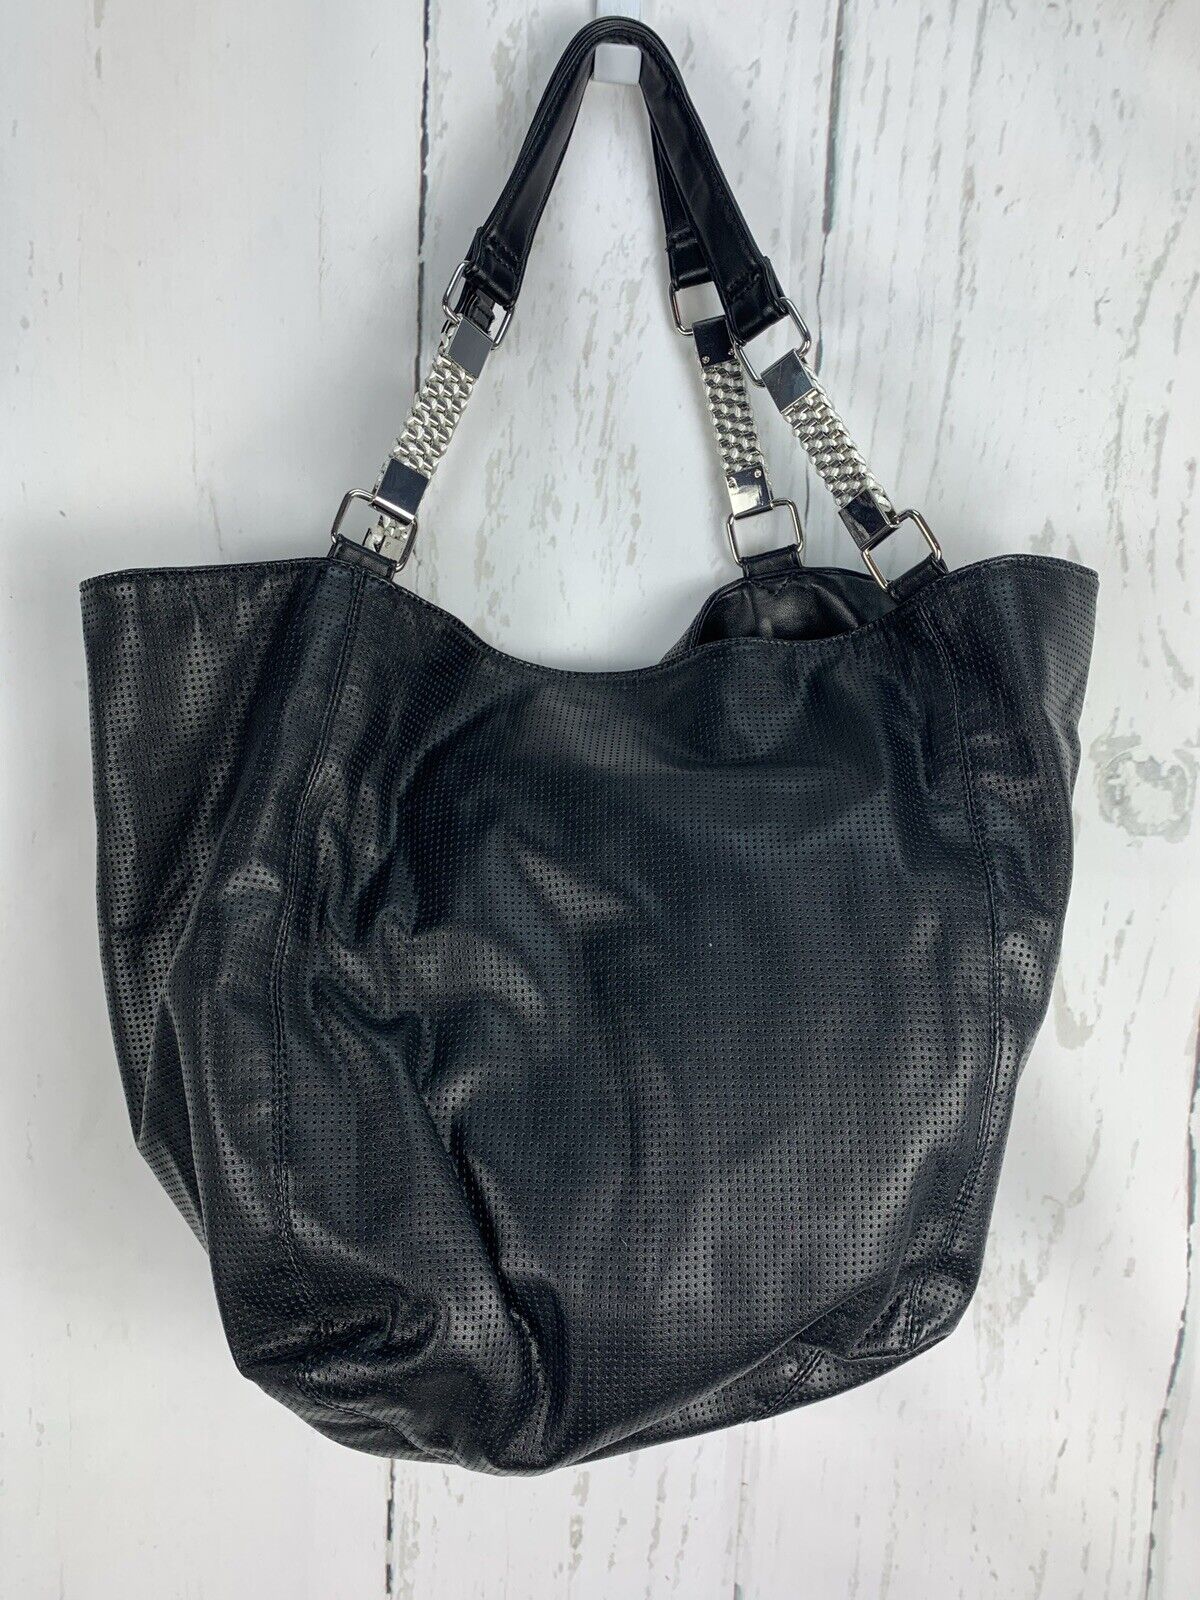 NWT Latique Black Faux Leather Perforated Soft Hobo Purse $98